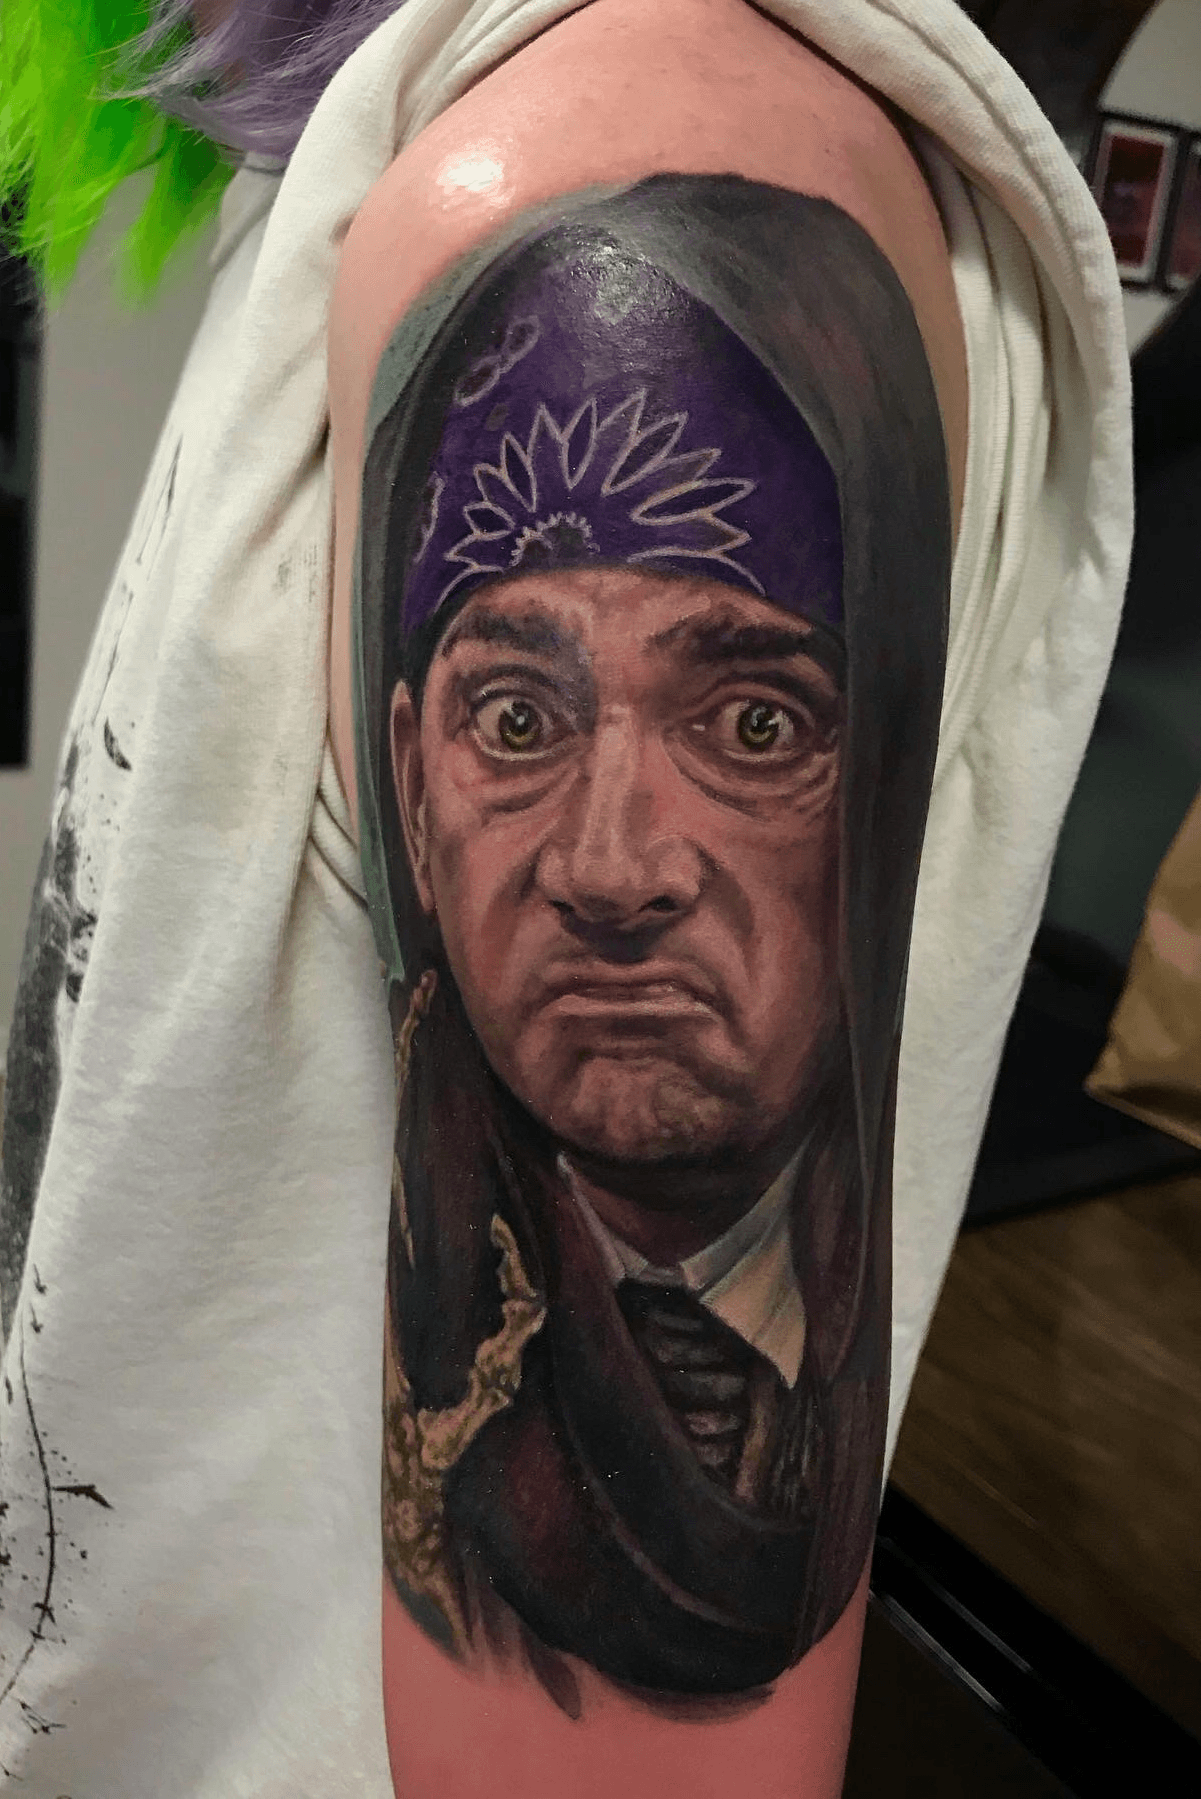 Port  Starboard Tattoo  Prison mike portrait I did up Excited to see it  healed when it settles down a little bit Thanks for looking and have a  great Thursday  Facebook